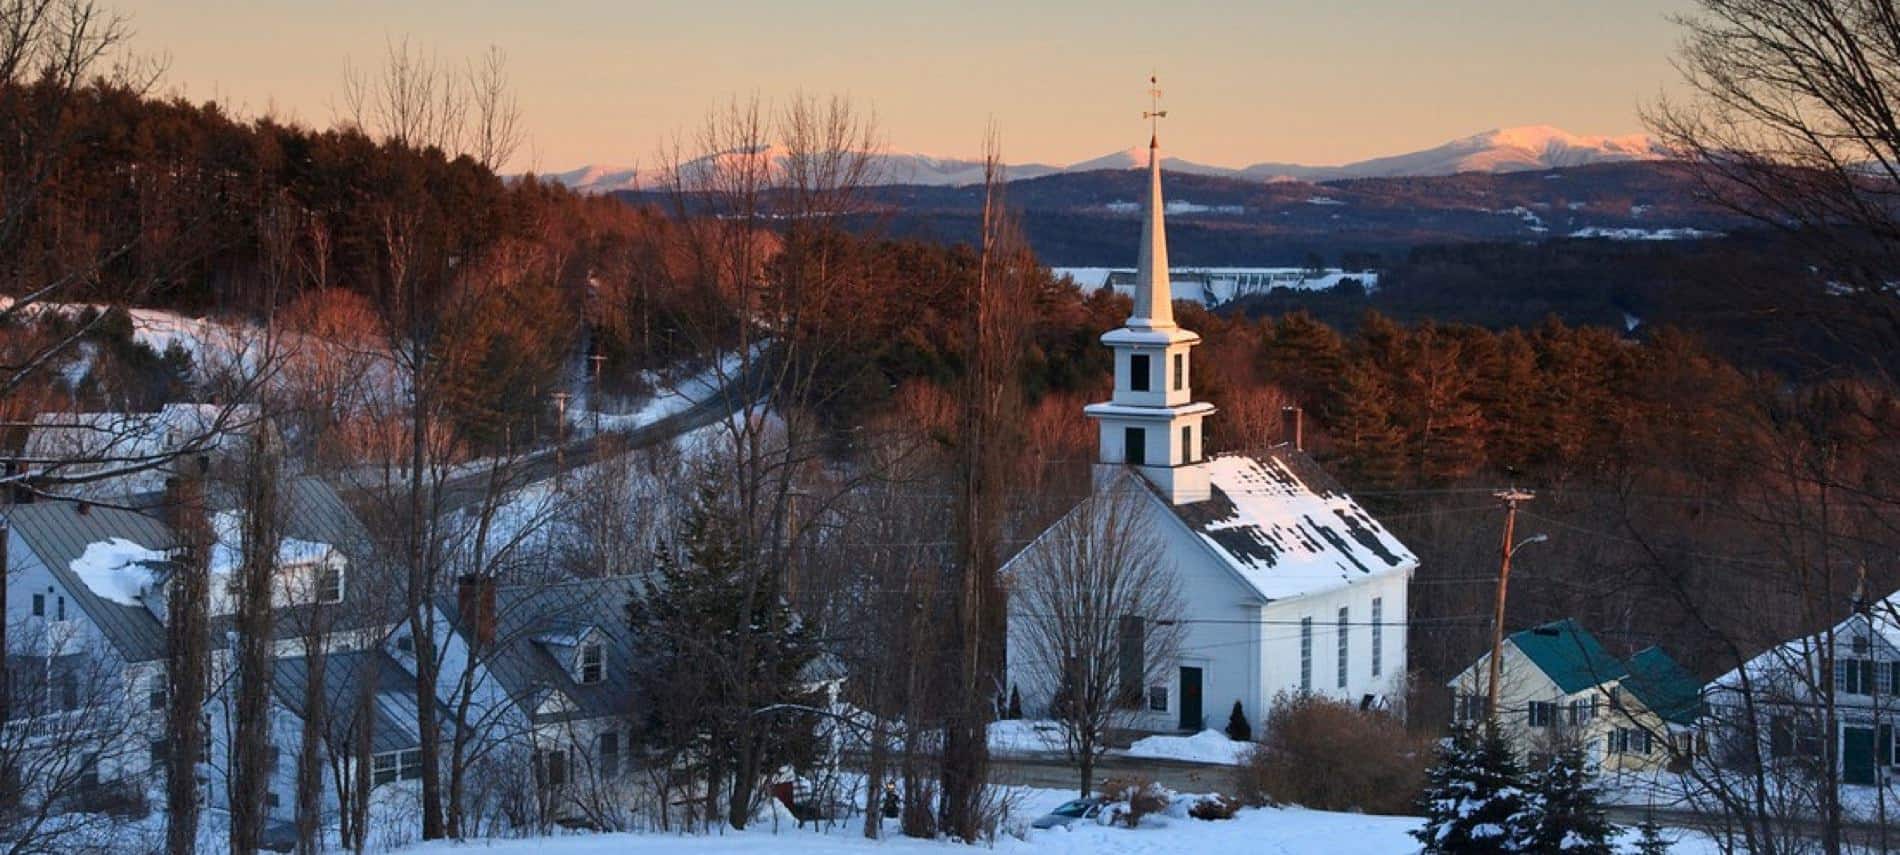 Aerial view of Vermont town in winter with hills, curvy roads, snow-topped buildings and white church with steeple